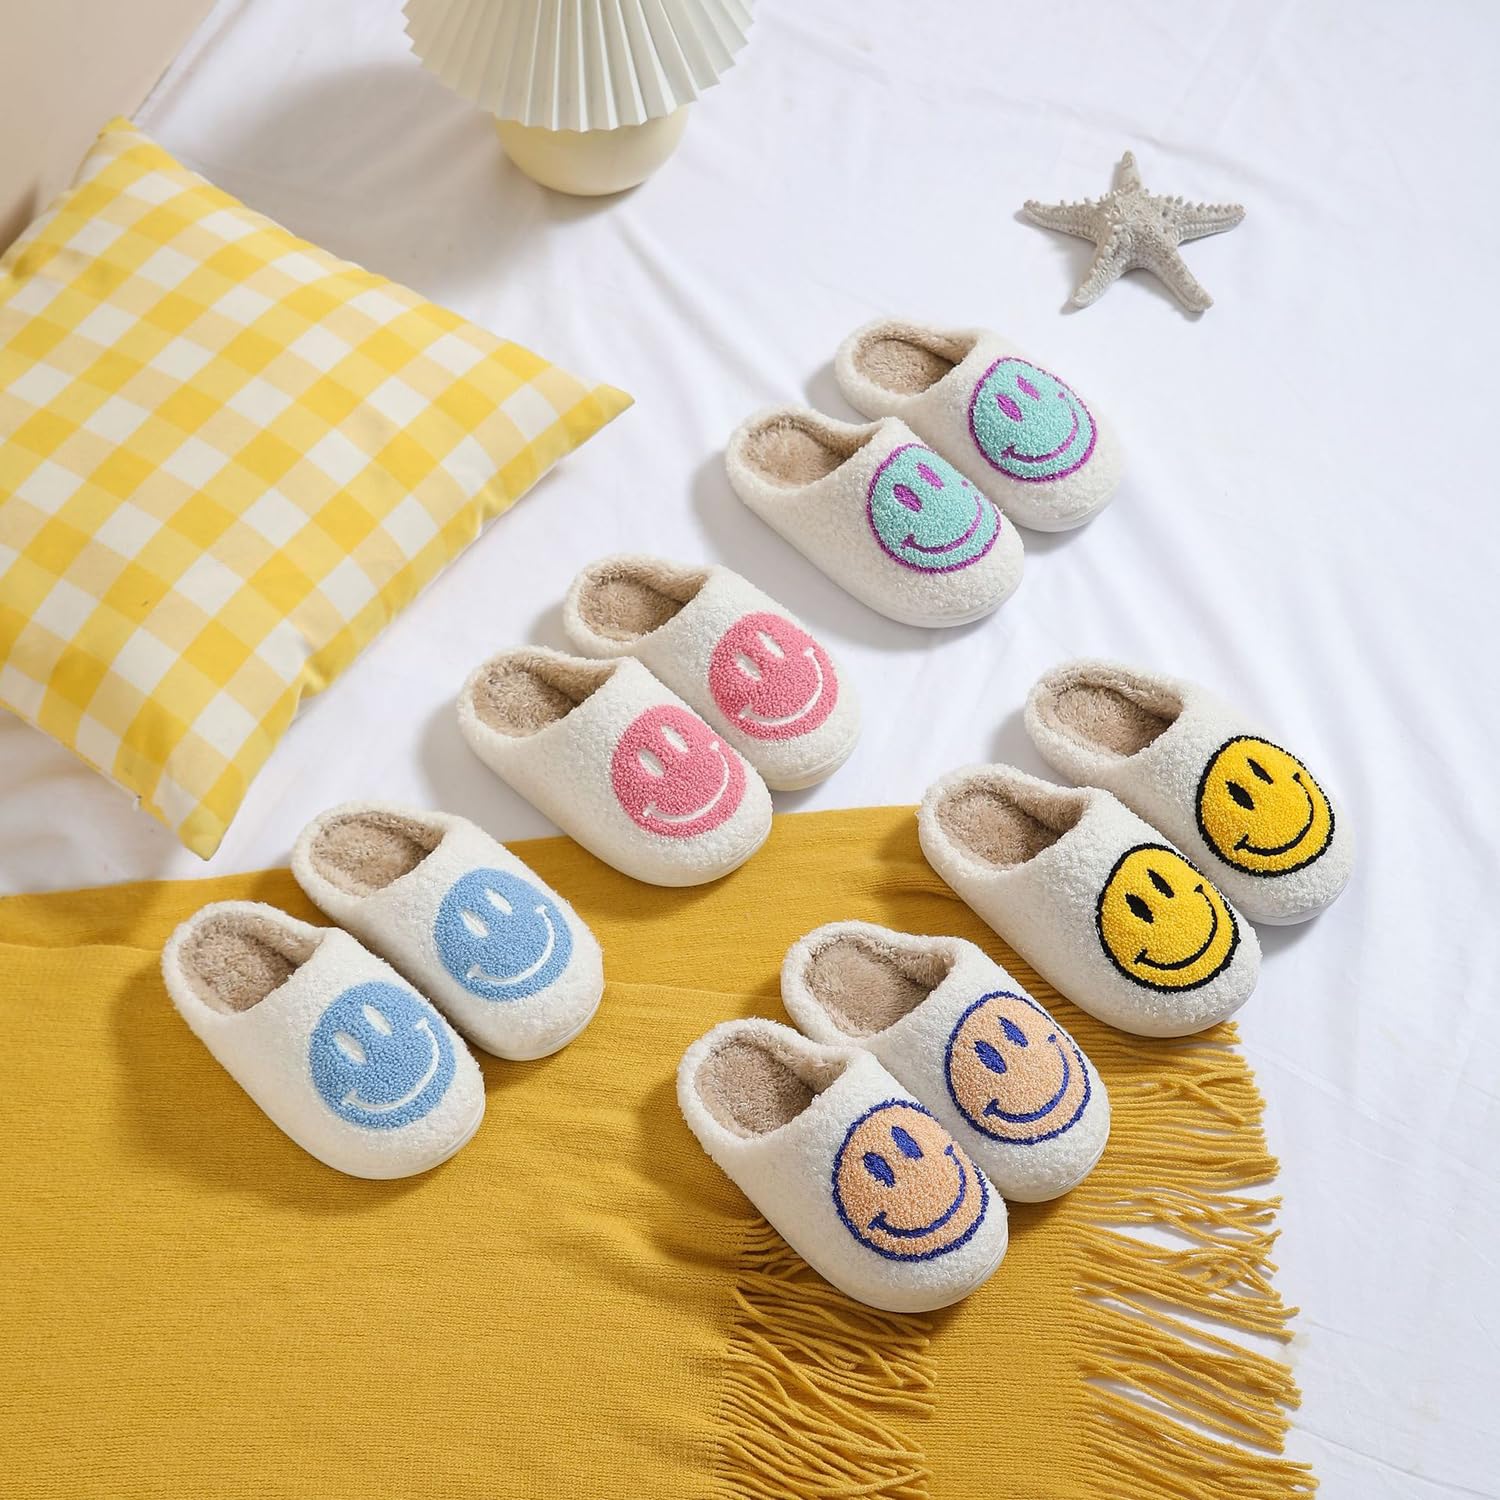 ZICKYO Kids Slippers Boys Girls Cute Happy Face House Slippers Warm Soft Plush Non-Slip Indoor Outdoor Slip-on Shoes